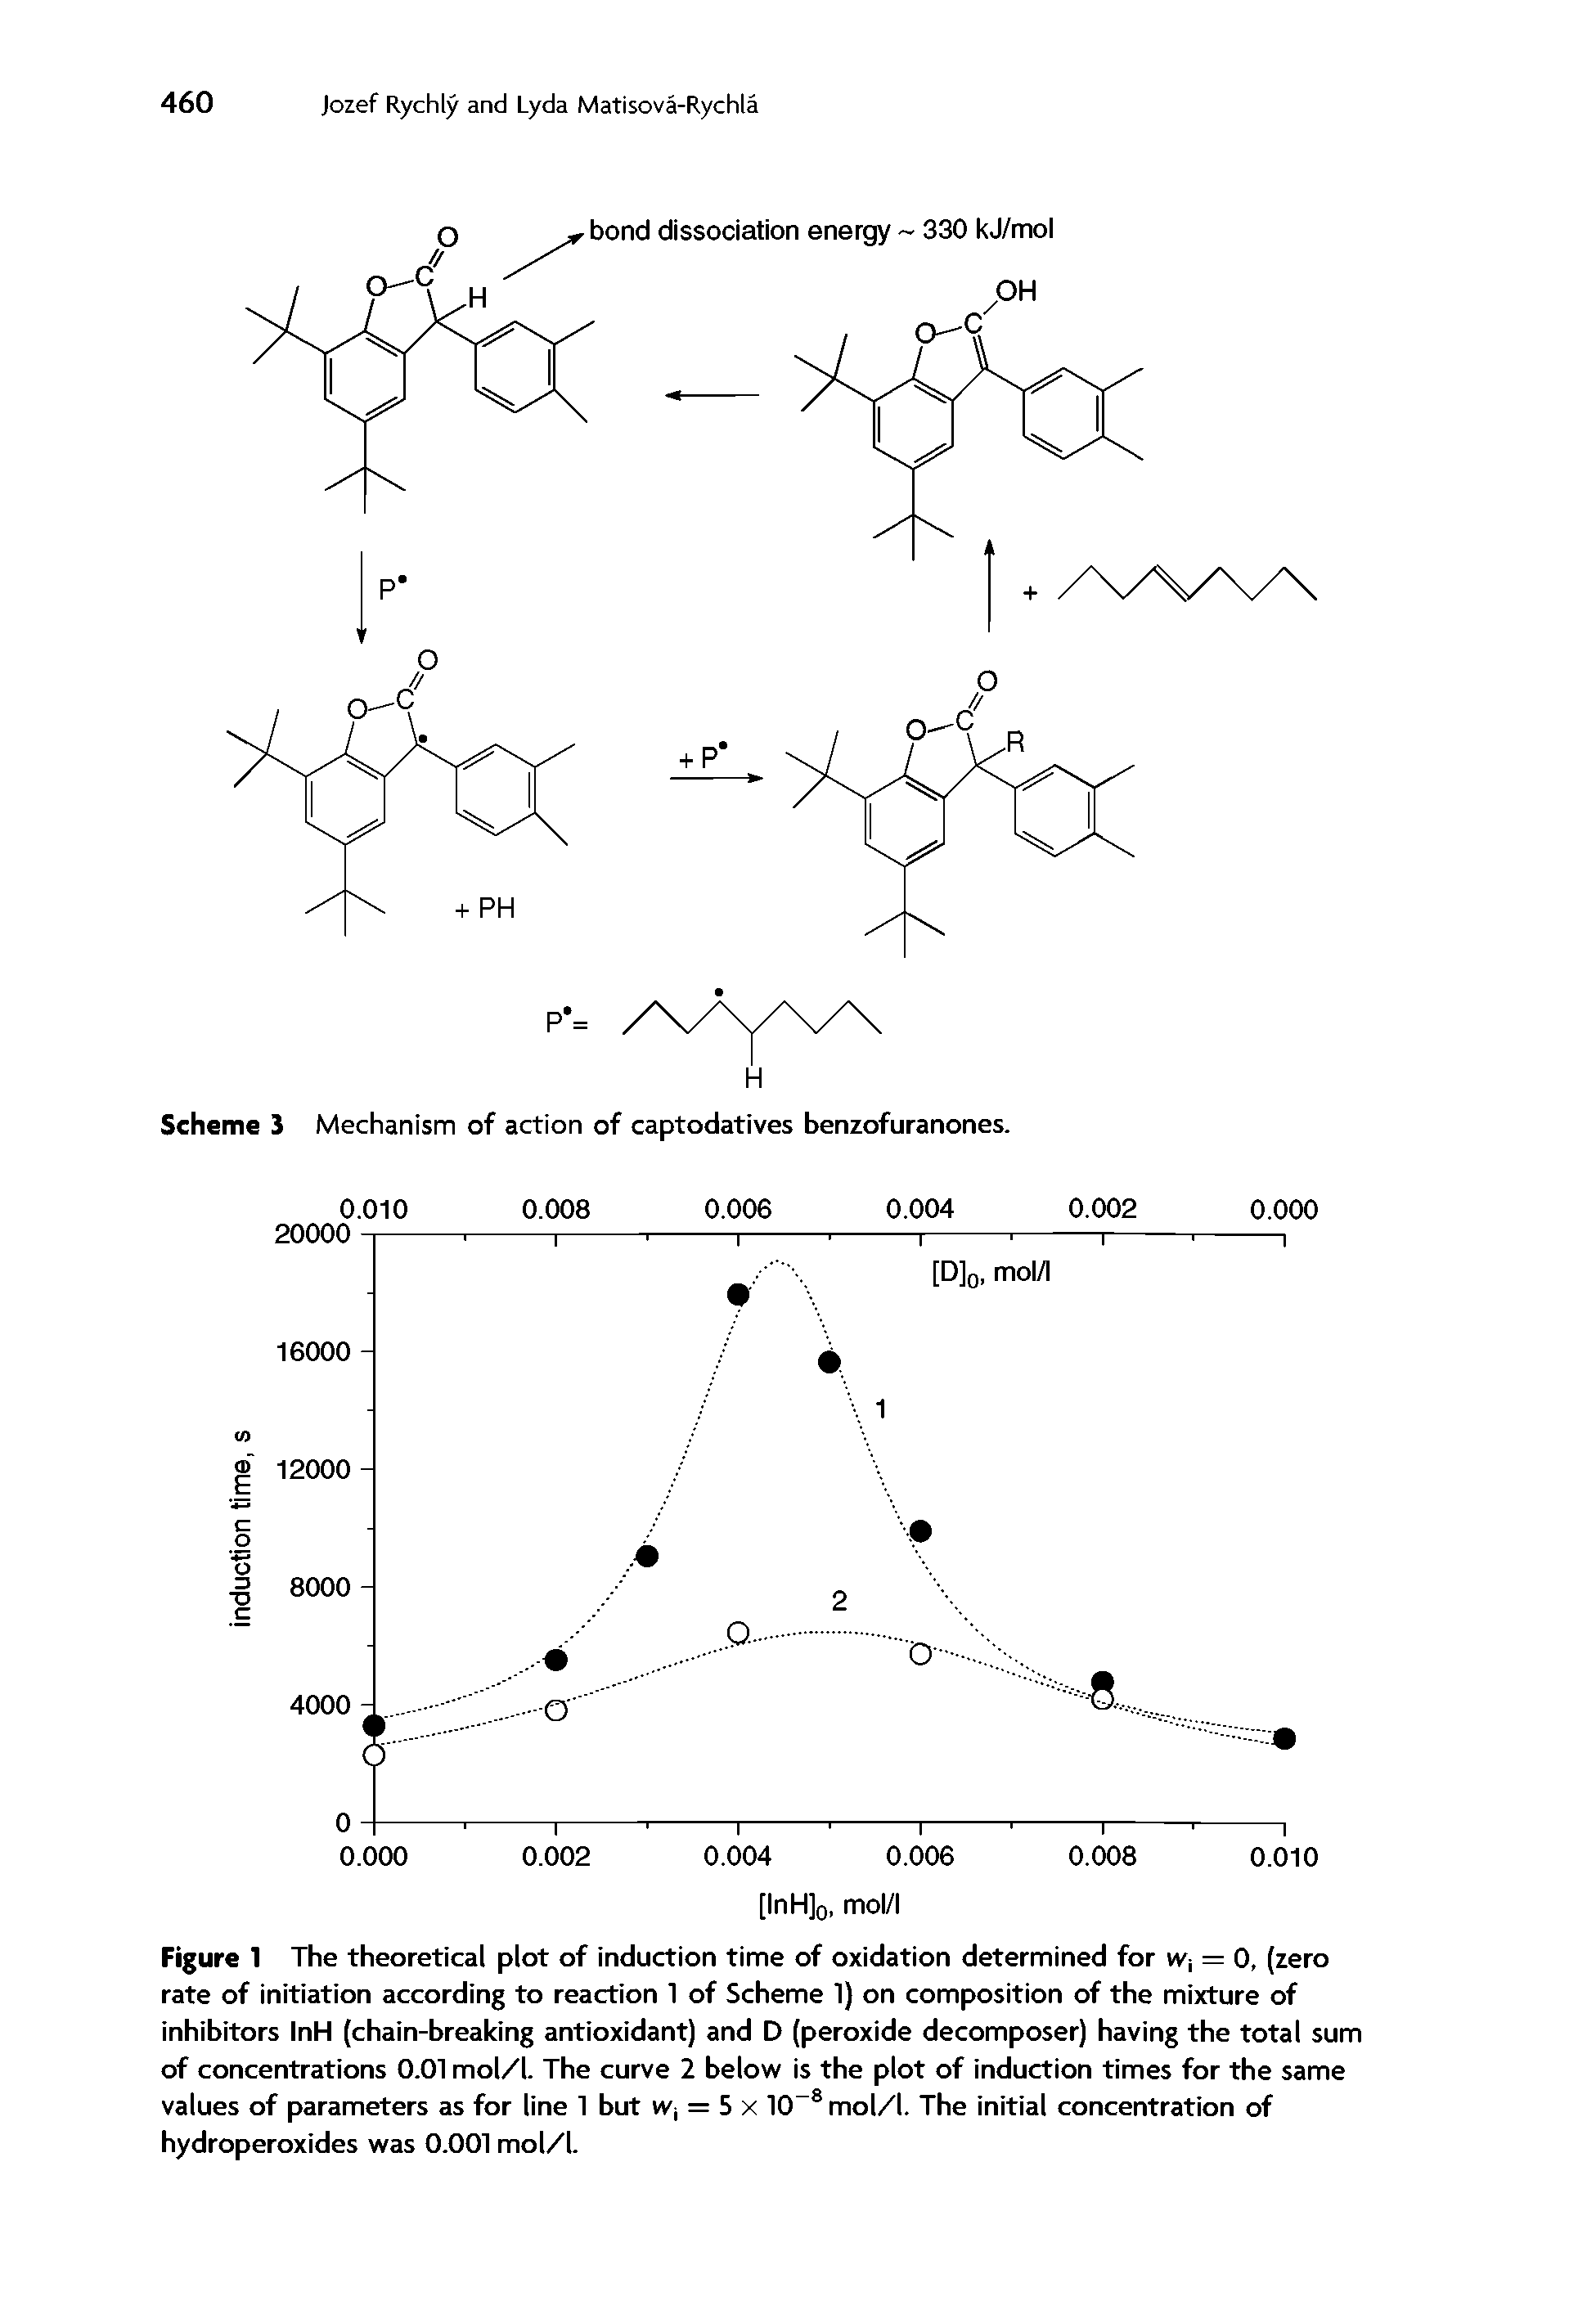 Figure 1 The theoretical plot of induction time of oxidation determined for wr — 0, (zero rate of initiation according to reaction 1 of Scheme 1) on composition of the mixture of inhibitors InH (chain-breaking antioxidant) and D (peroxide decomposer) having the total sum of concentrations 0.01 mol/l. The curve 2 below is the plot of induction times for the same values of parameters as for line 1 but w, = 5 x 10-8 mol/l. The initial concentration of hydroperoxides was 0.001 mol/l.